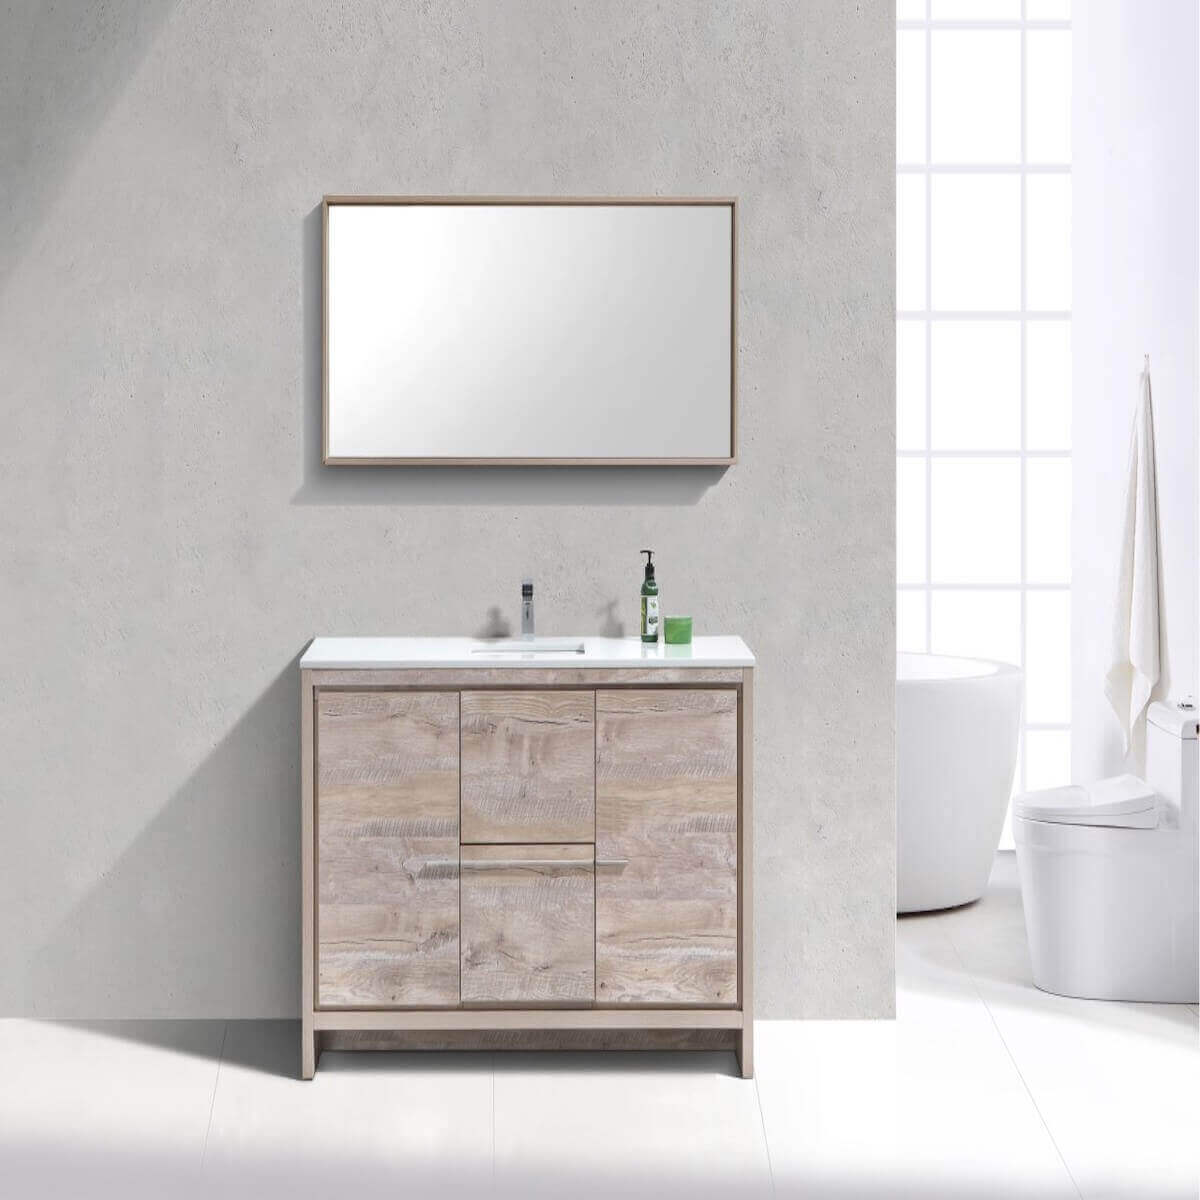 KubeBath Dolce 60" Nature Wood Freestanding Single Vanity with Quartz Countertop AD660SNW in Bathroom #finish_nature wood